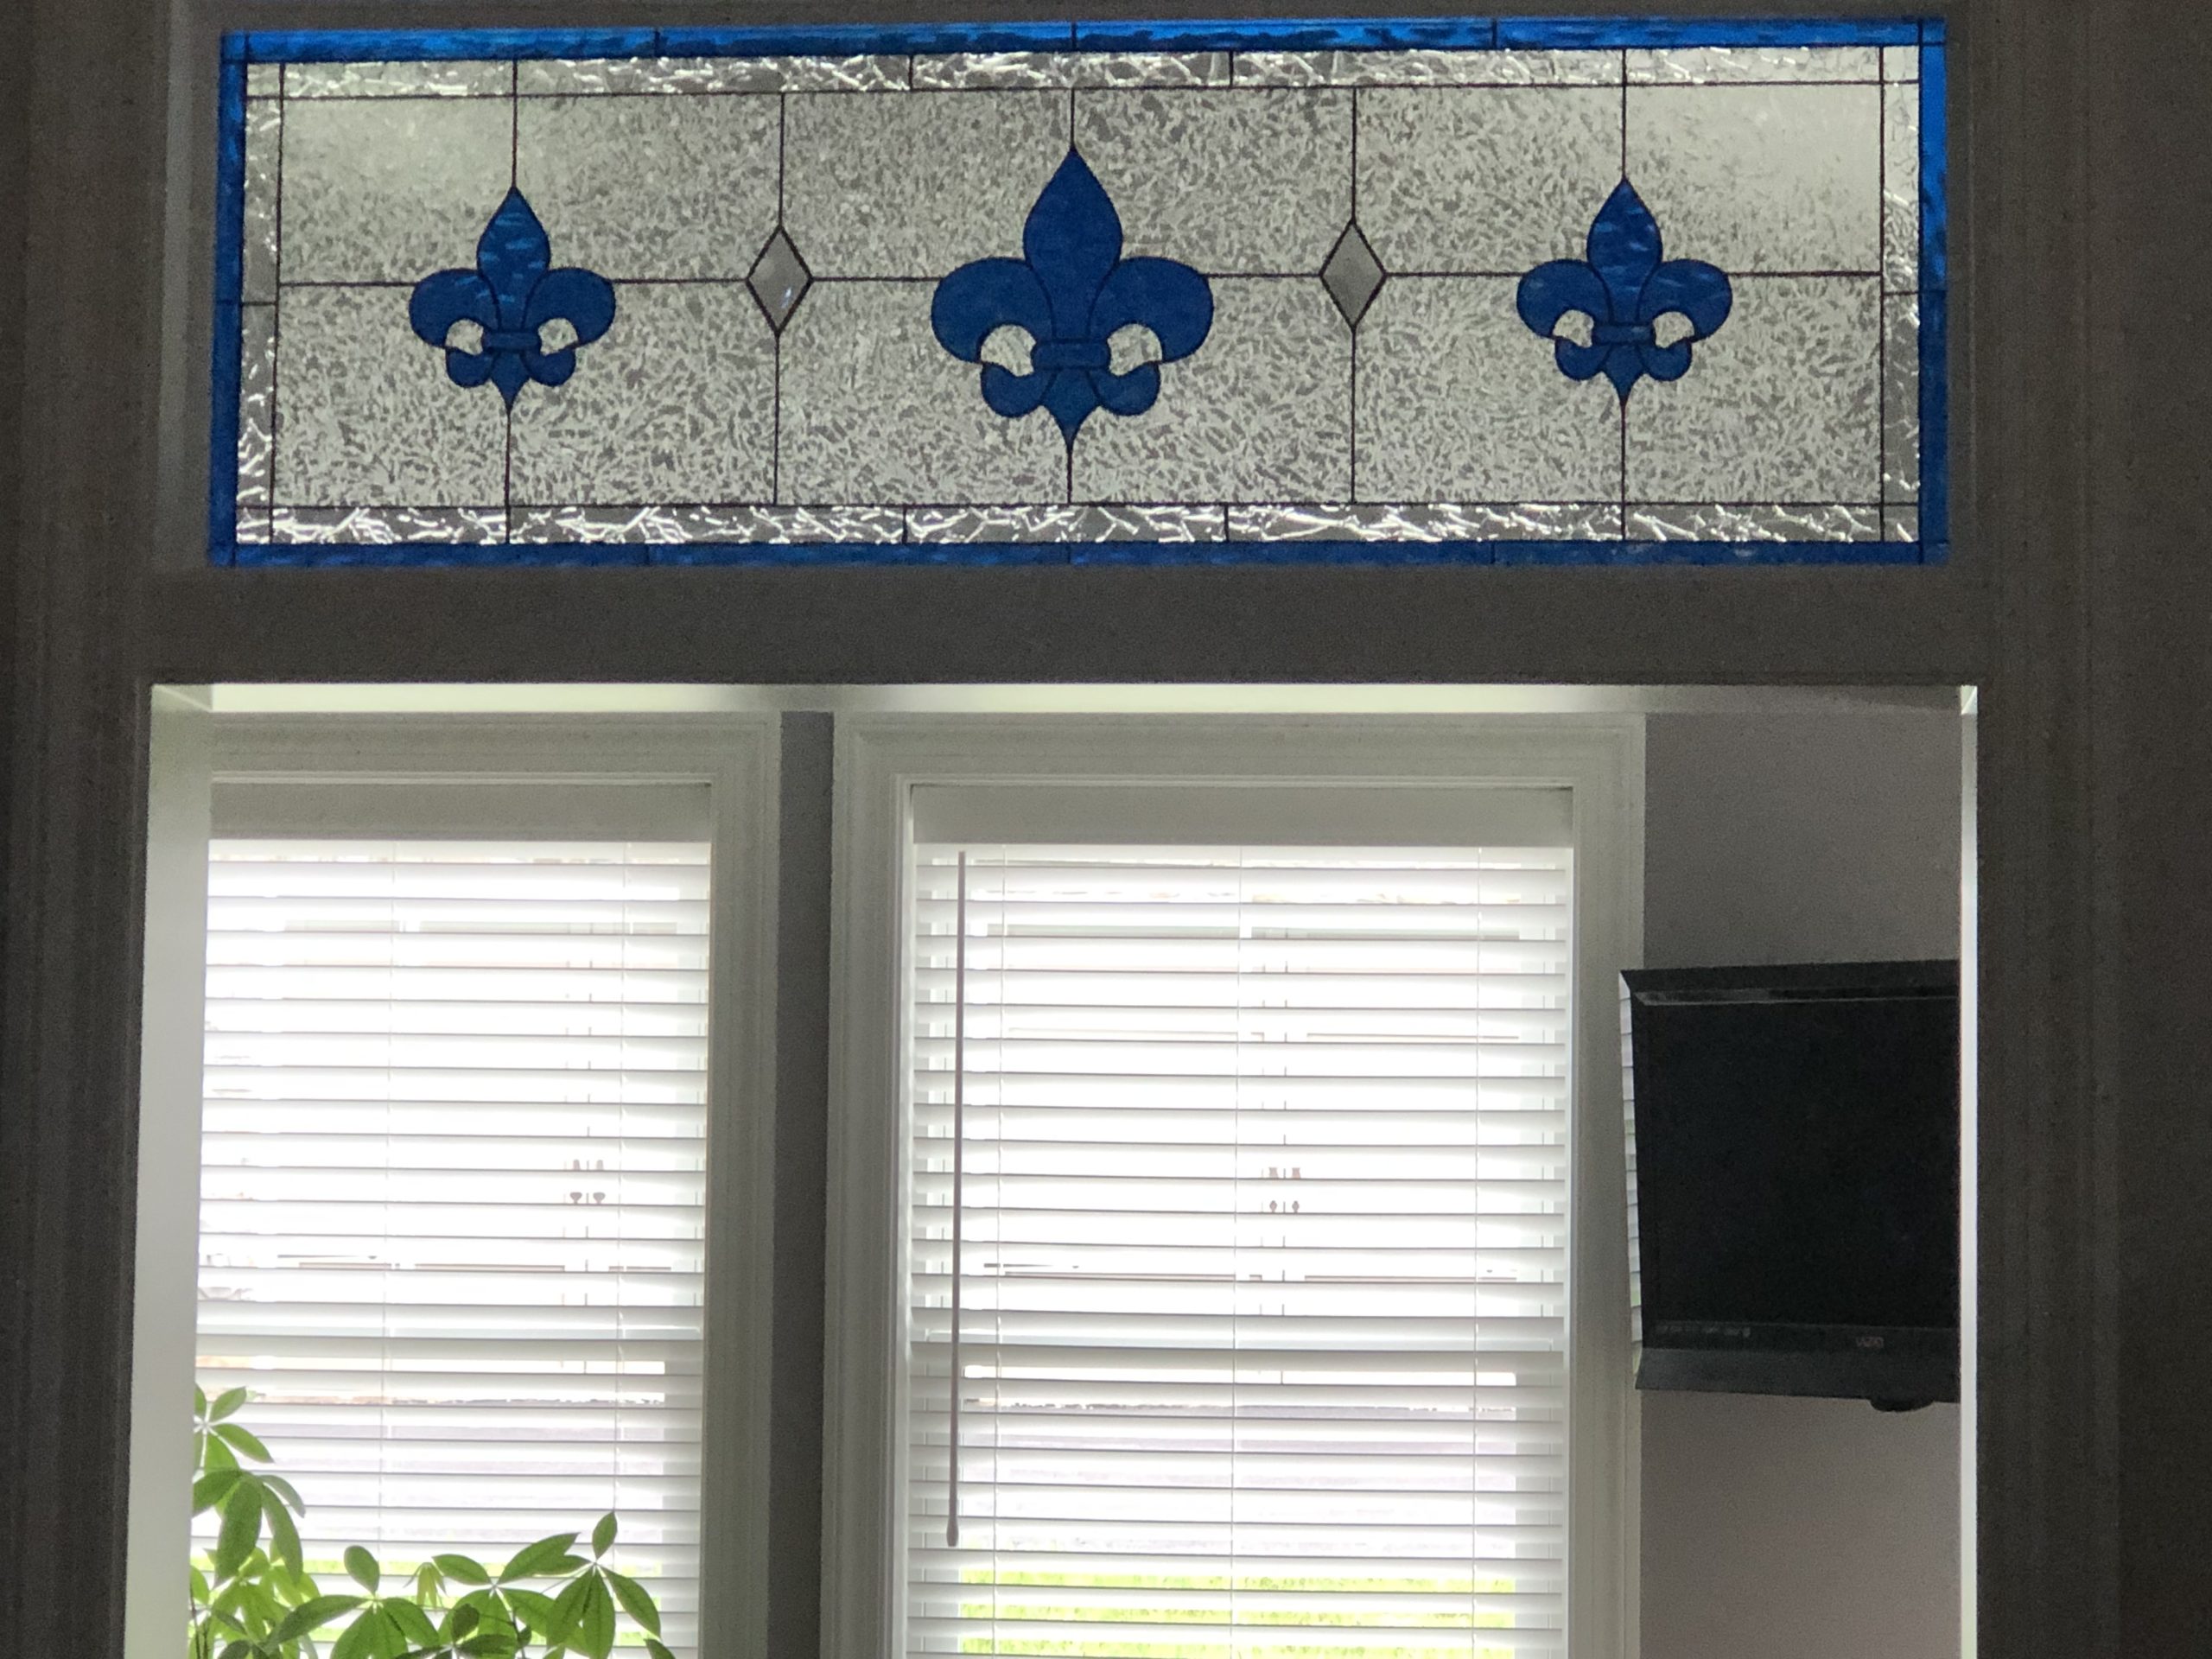 Beautiful ”Galway” Classic Fleur De Lis Stained Glass Transom Window